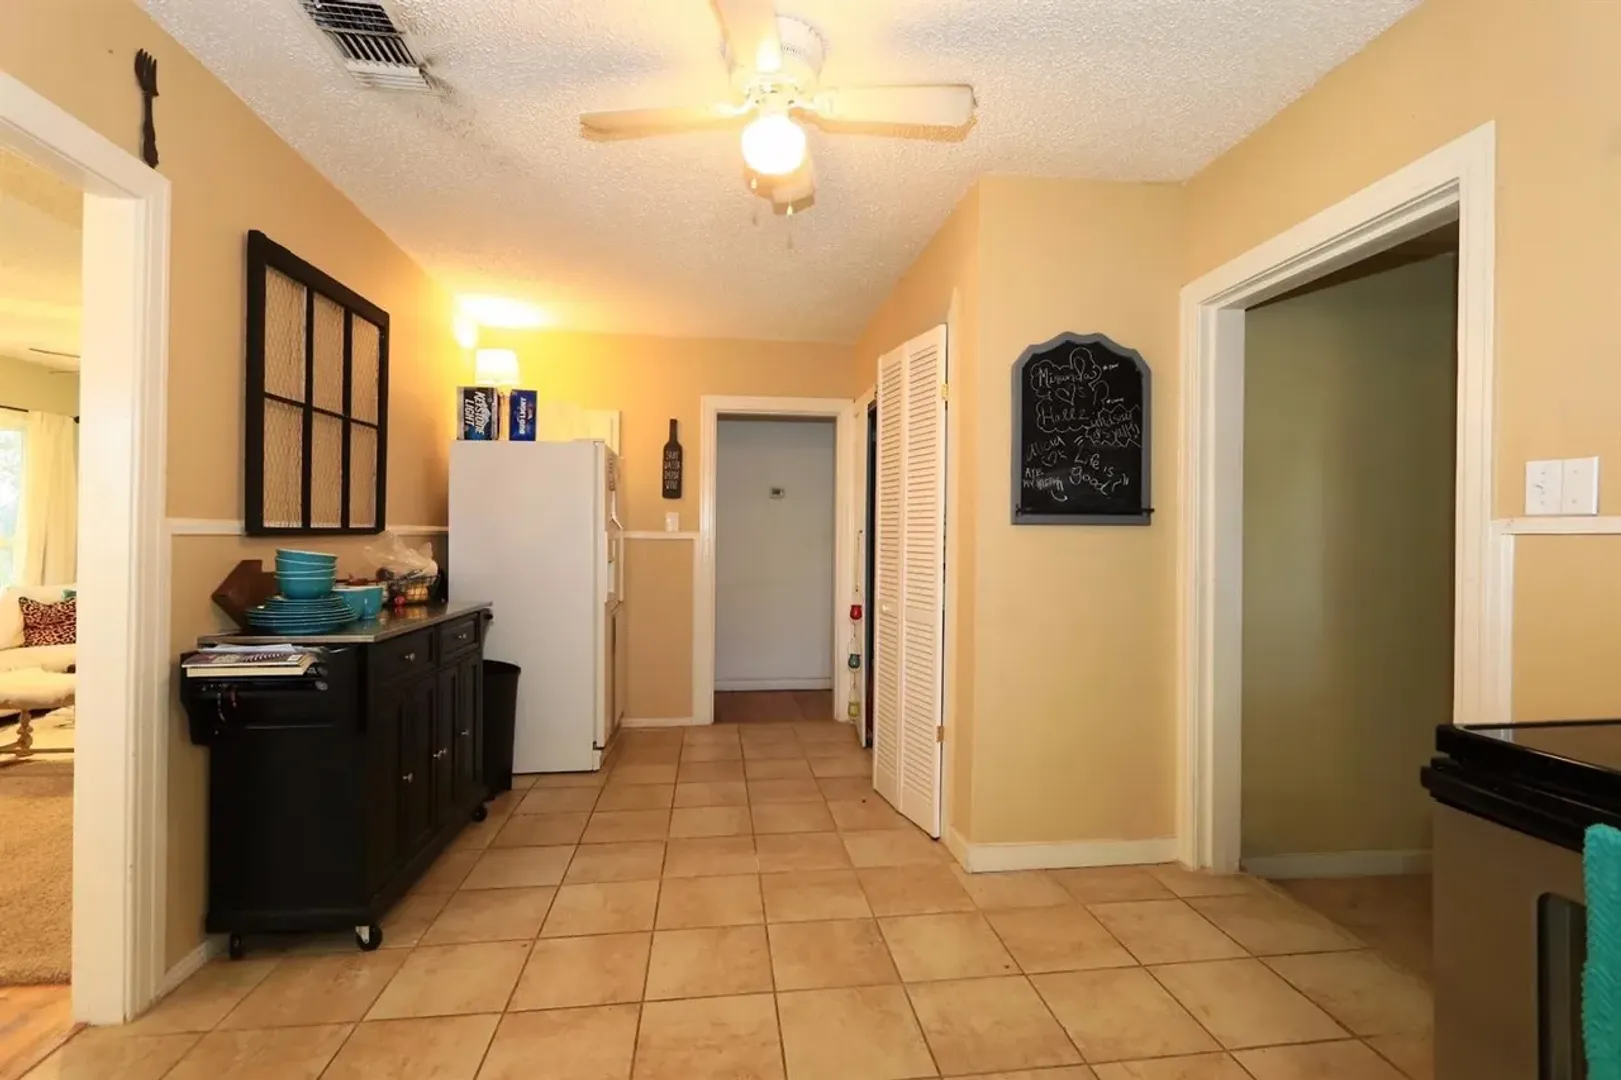 Pre-leasing for Fall! Cute 3/2 In Tech Terrace With Washer & Dryer!